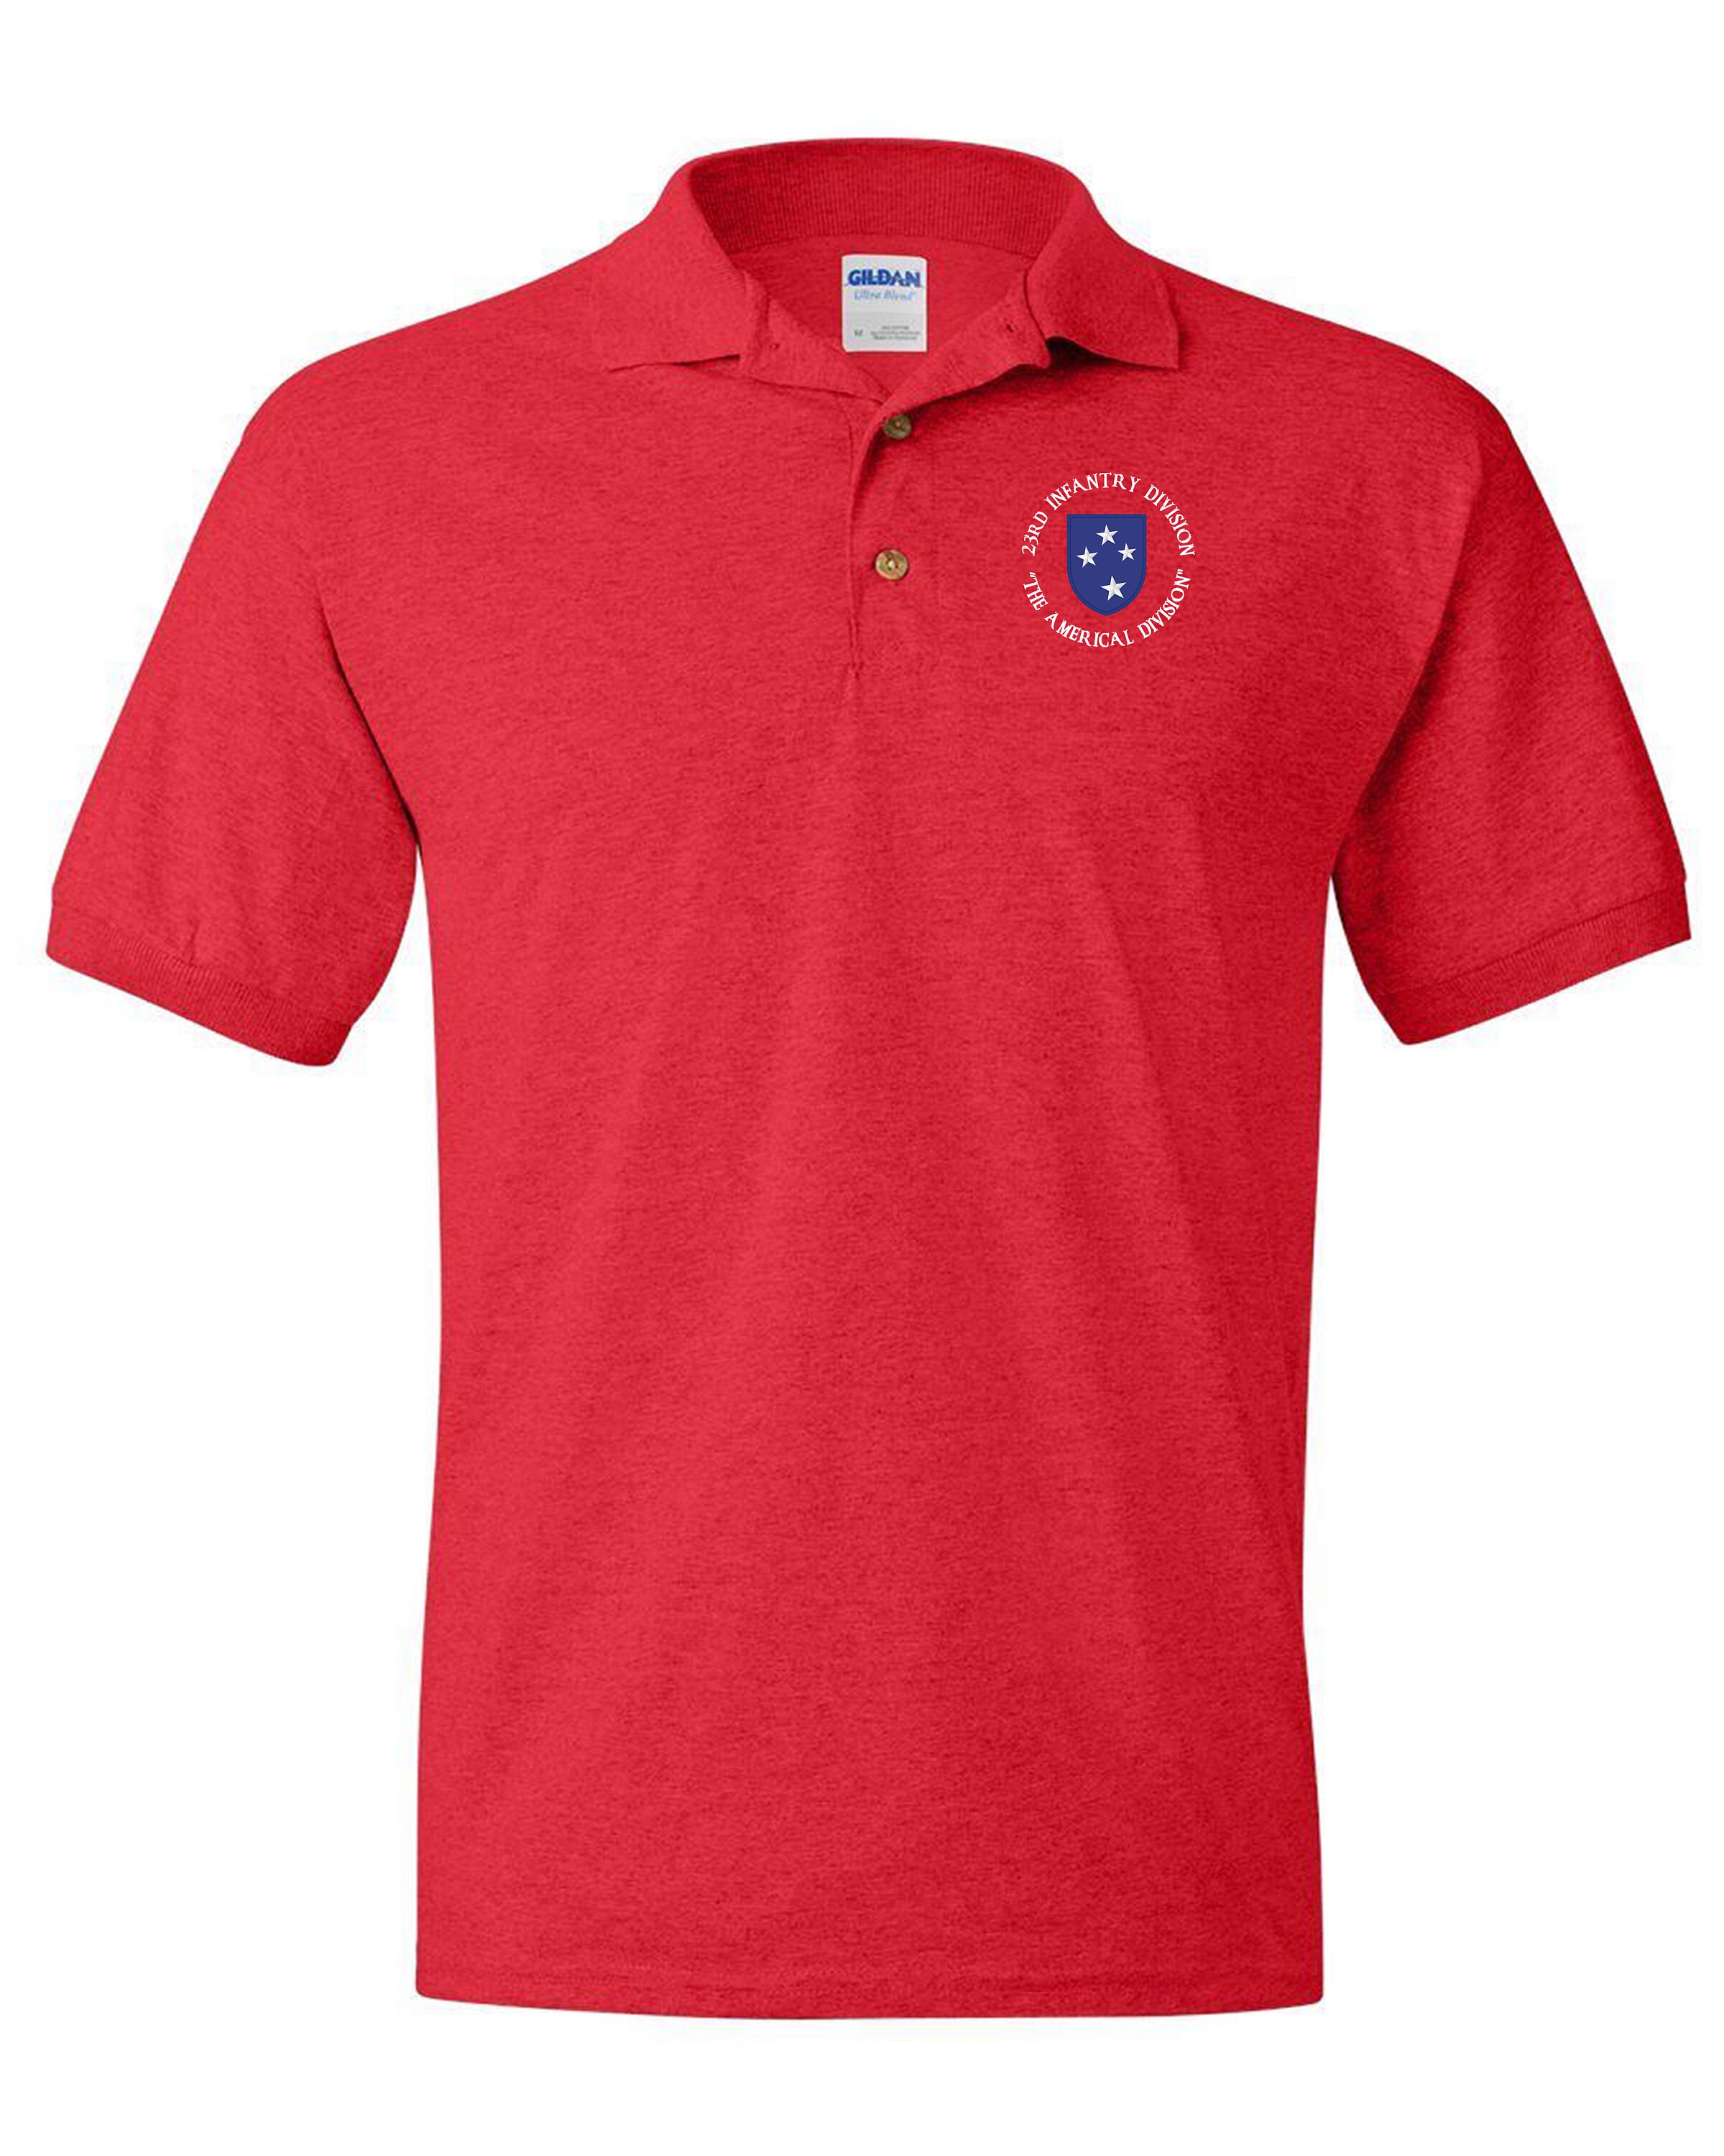 Kleding Gender-neutrale kleding volwassenen Tops & T-shirts Polos Army 23rd Infantry Division Embroidered Performance Golf Polo 